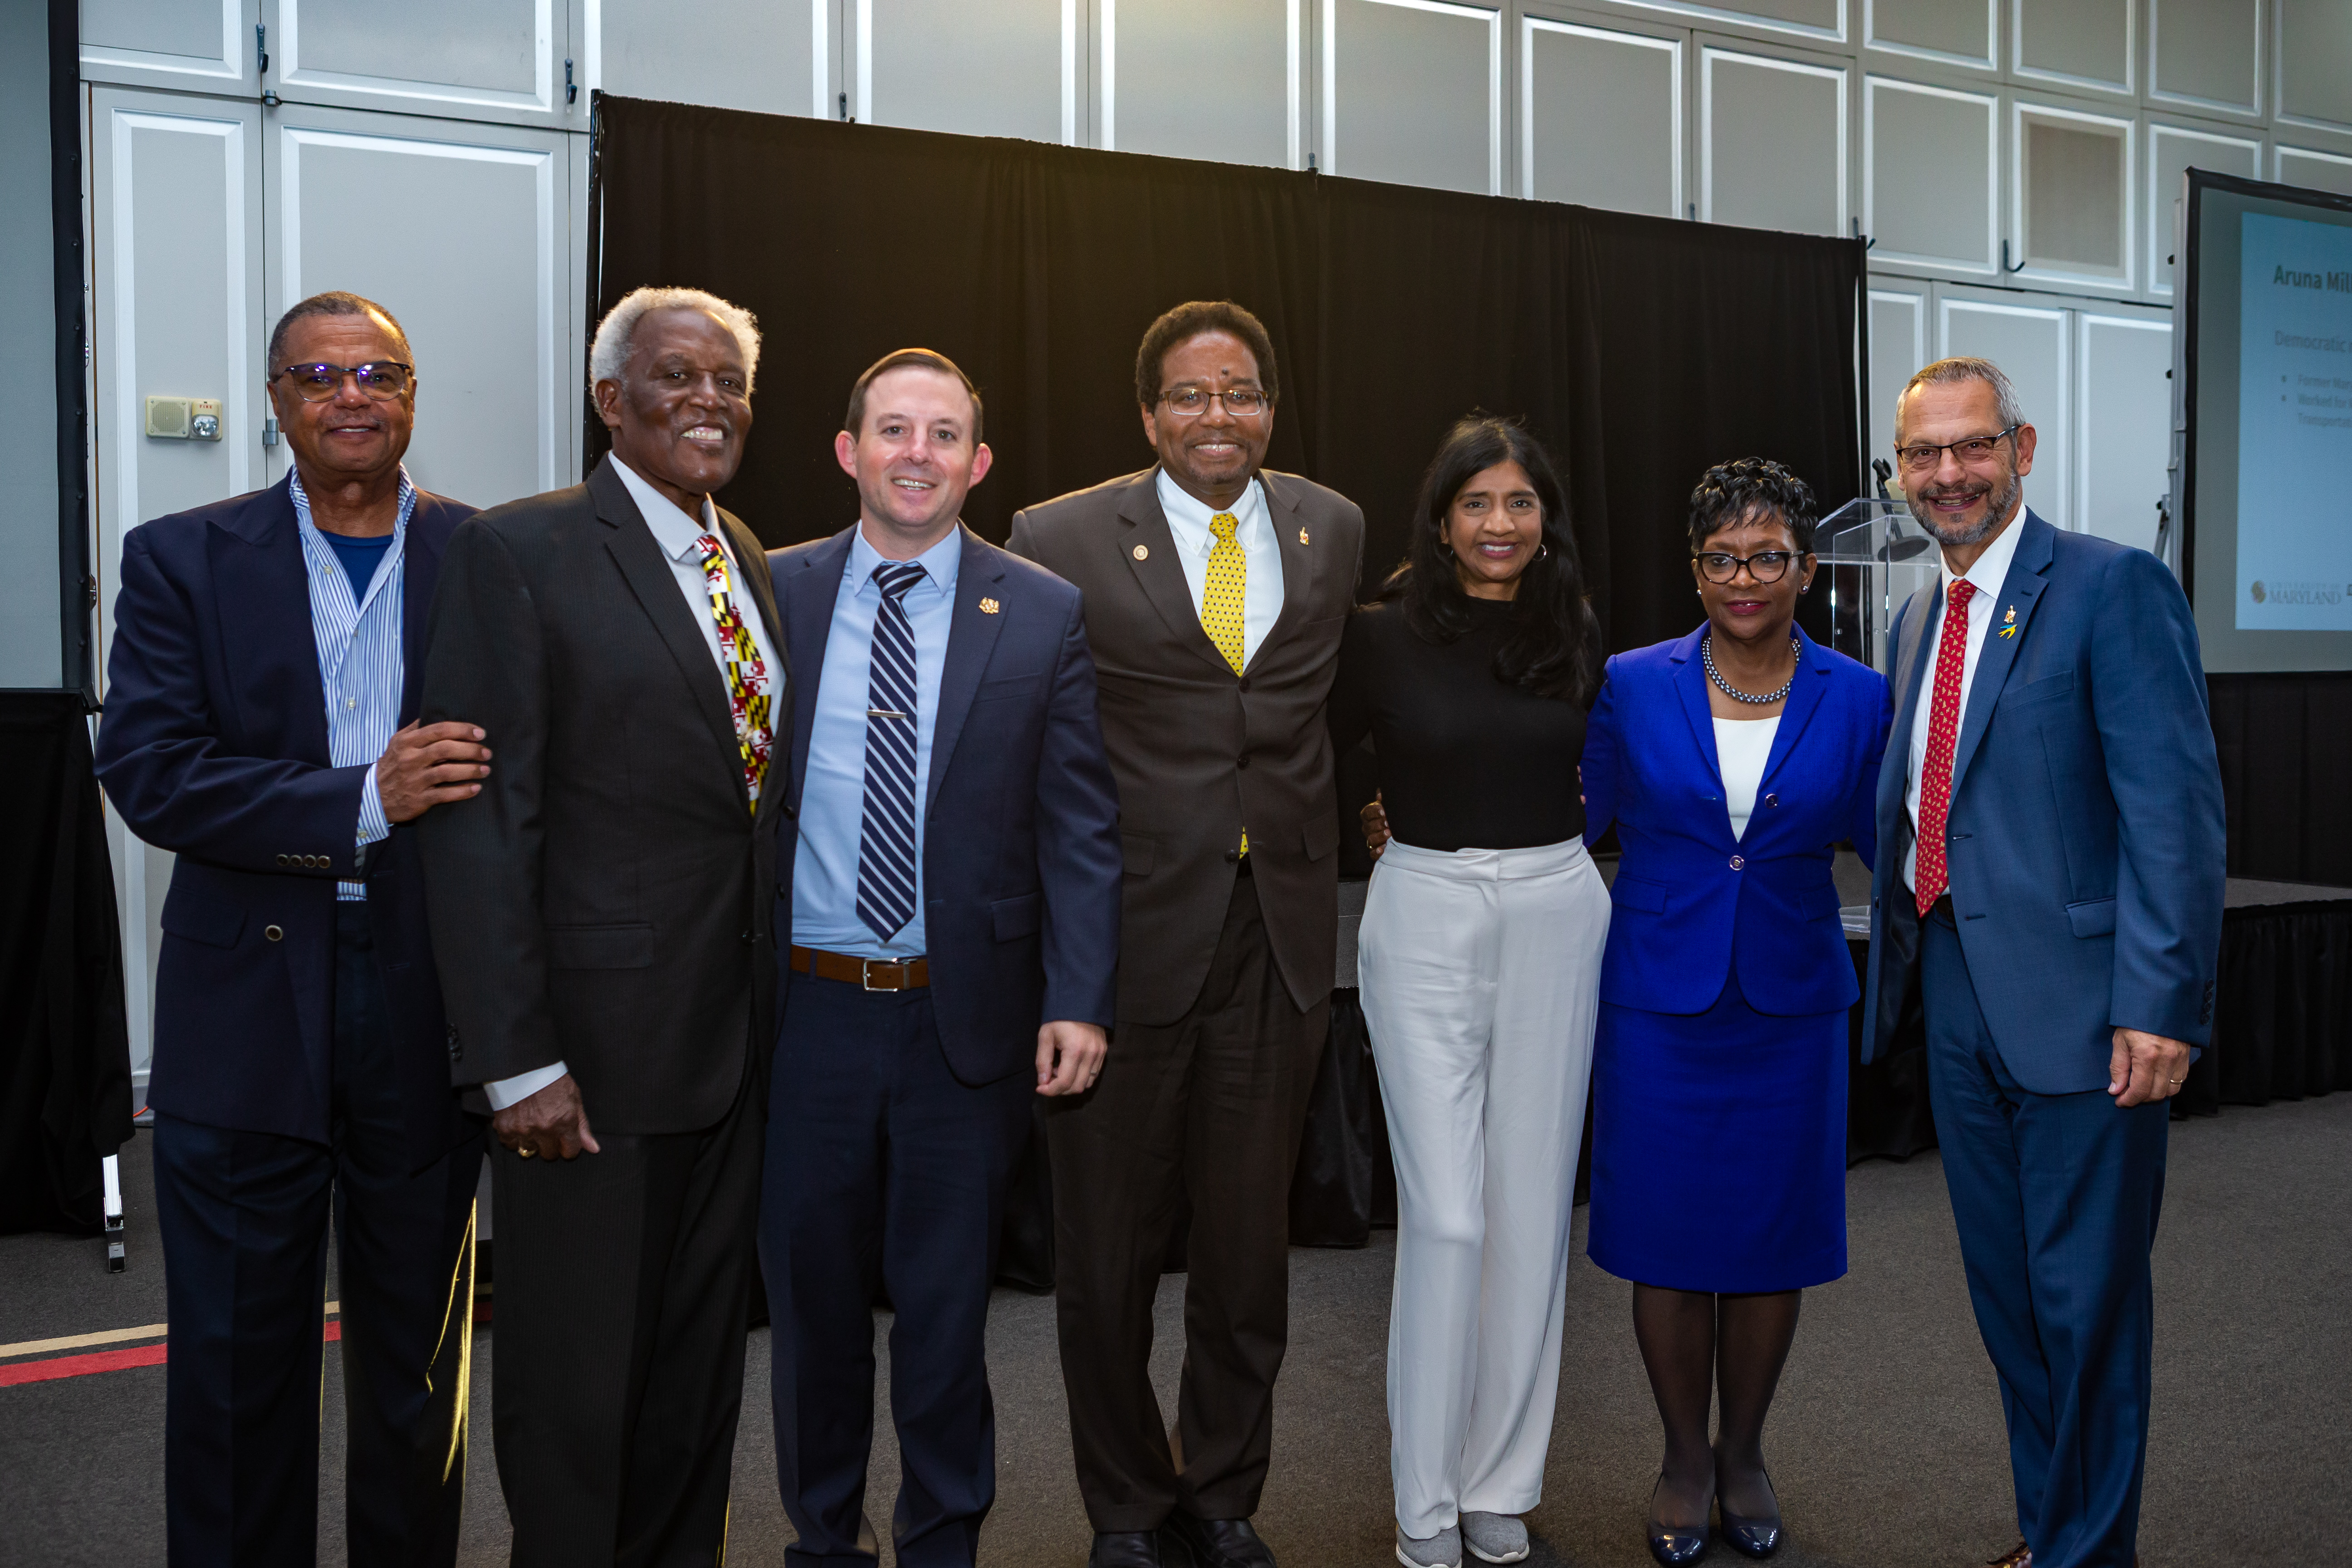 Elected officials and campus leaders gather to support the University of Maryland School of Public Health Legacy Leadership program.